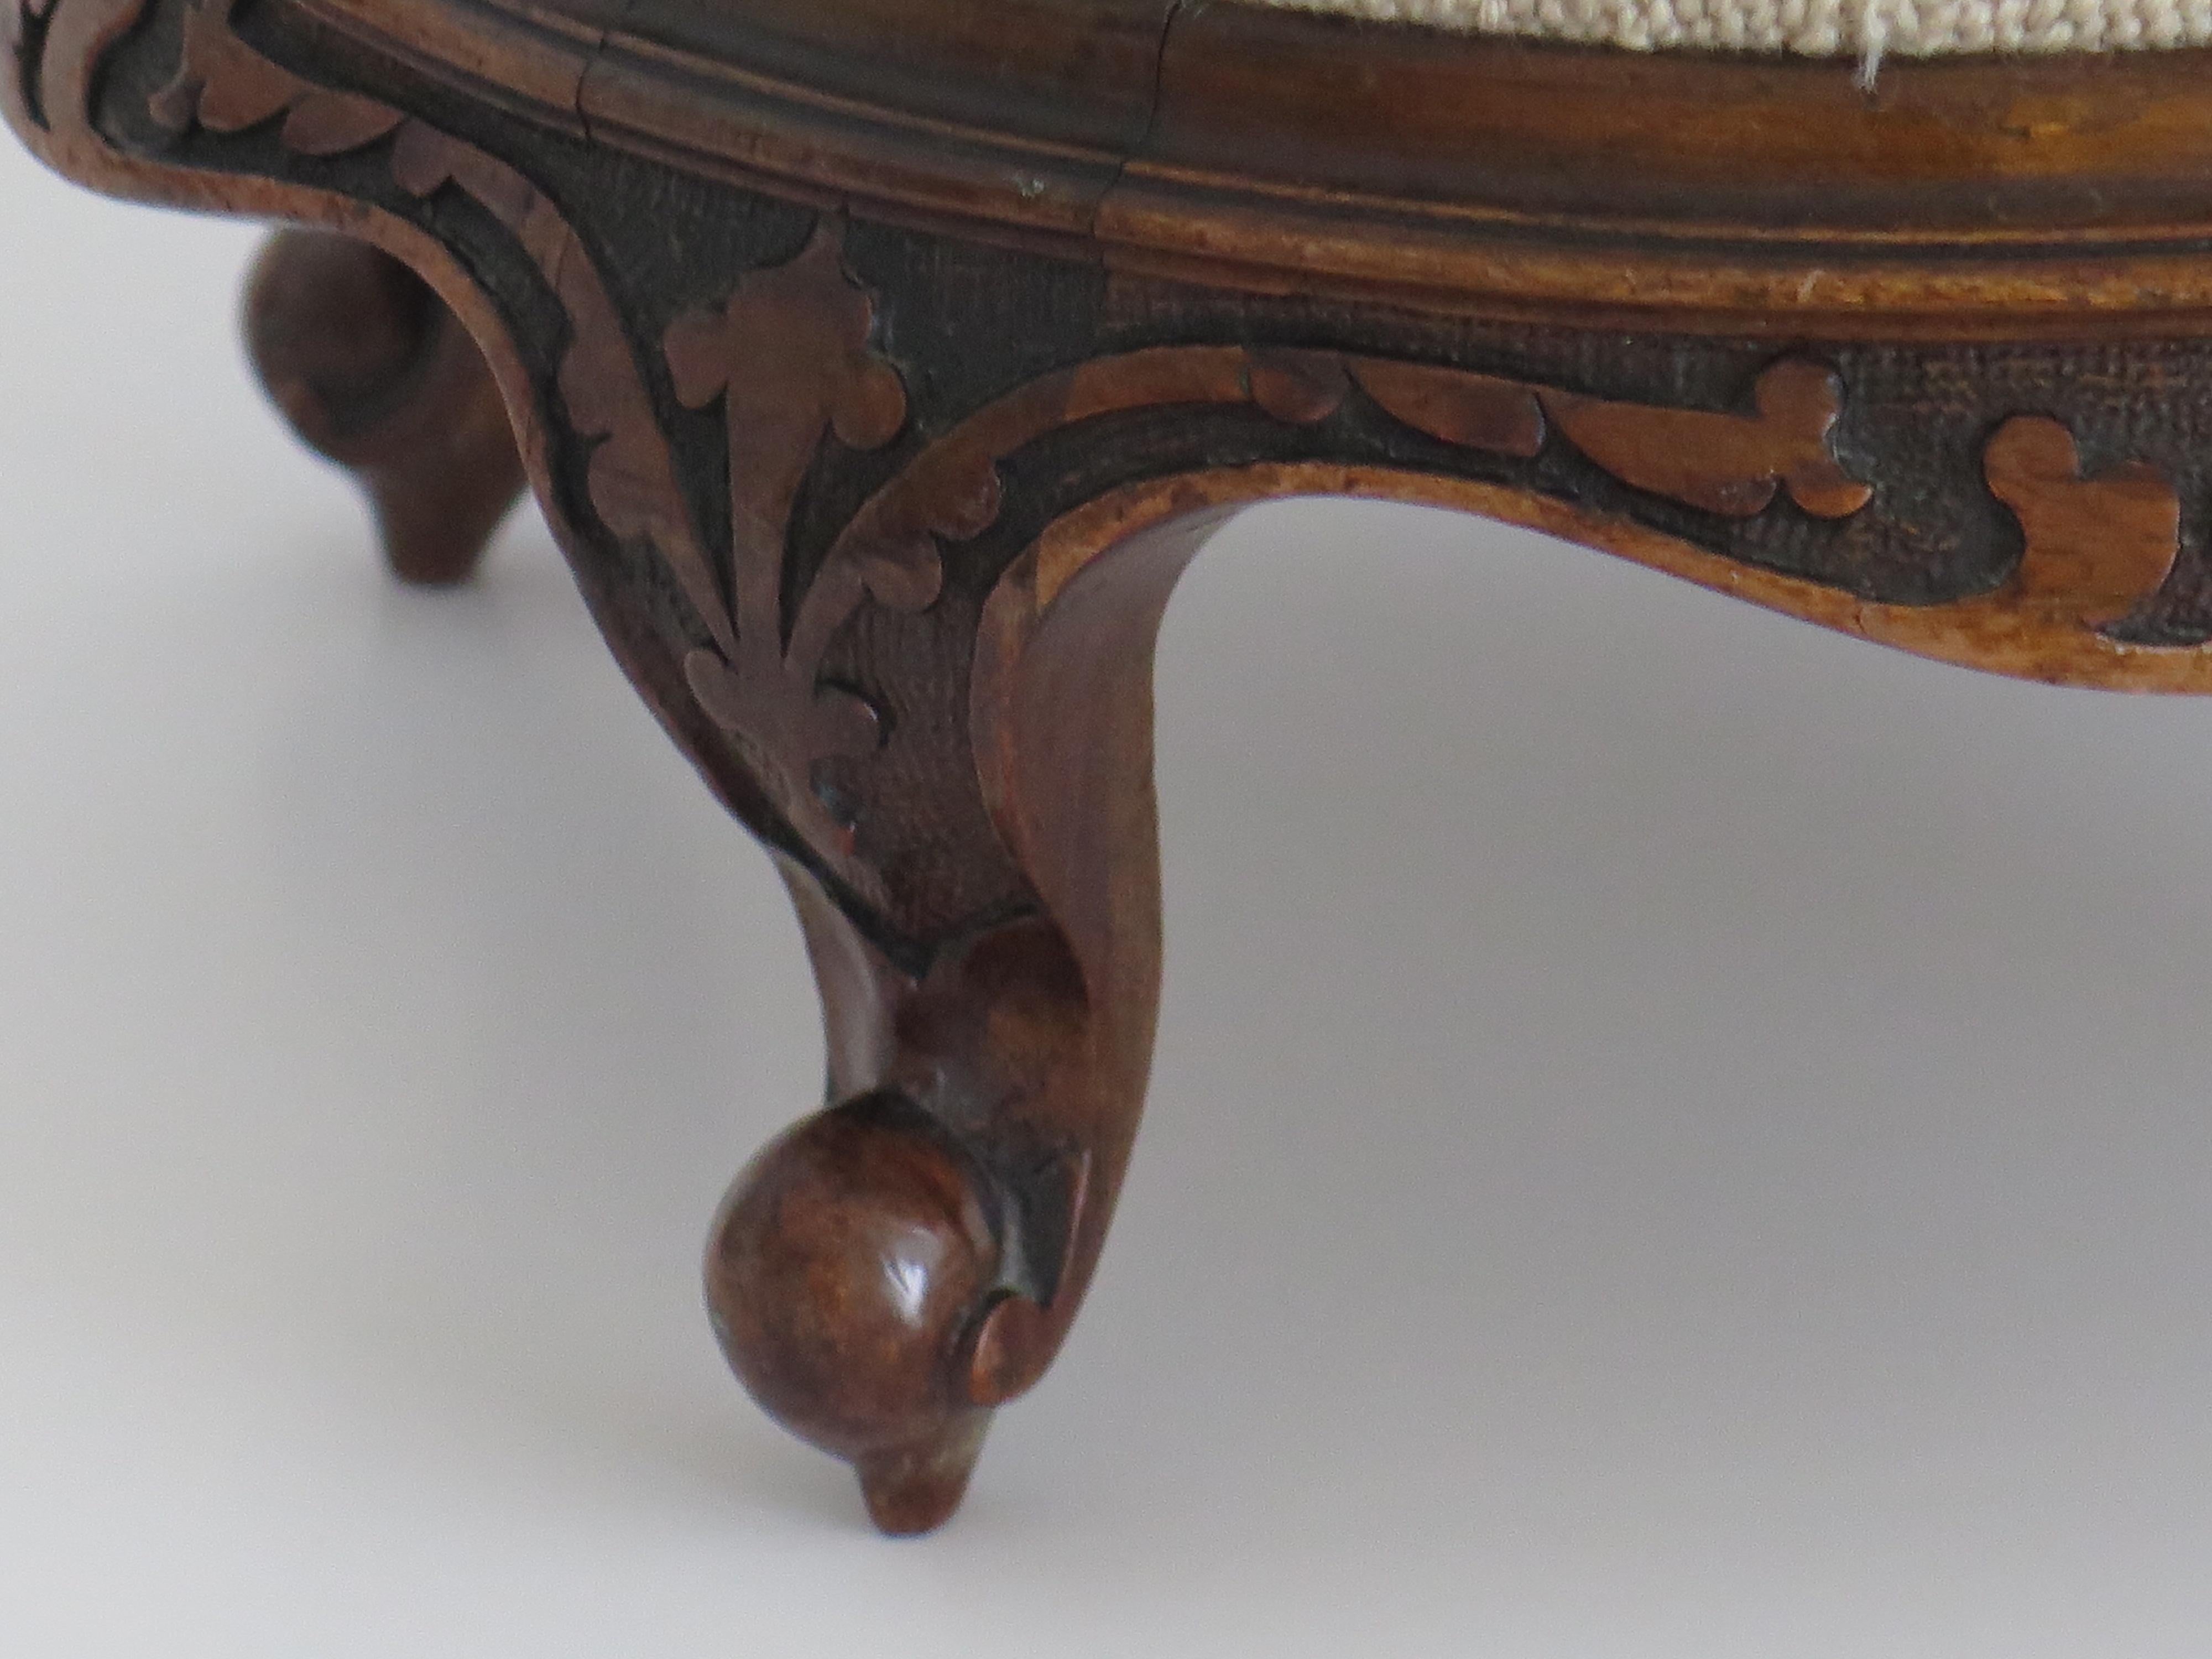 Foot Stool Early Victorian Carved Walnut with Wool-Work Top, English, Circa 1850 For Sale 2